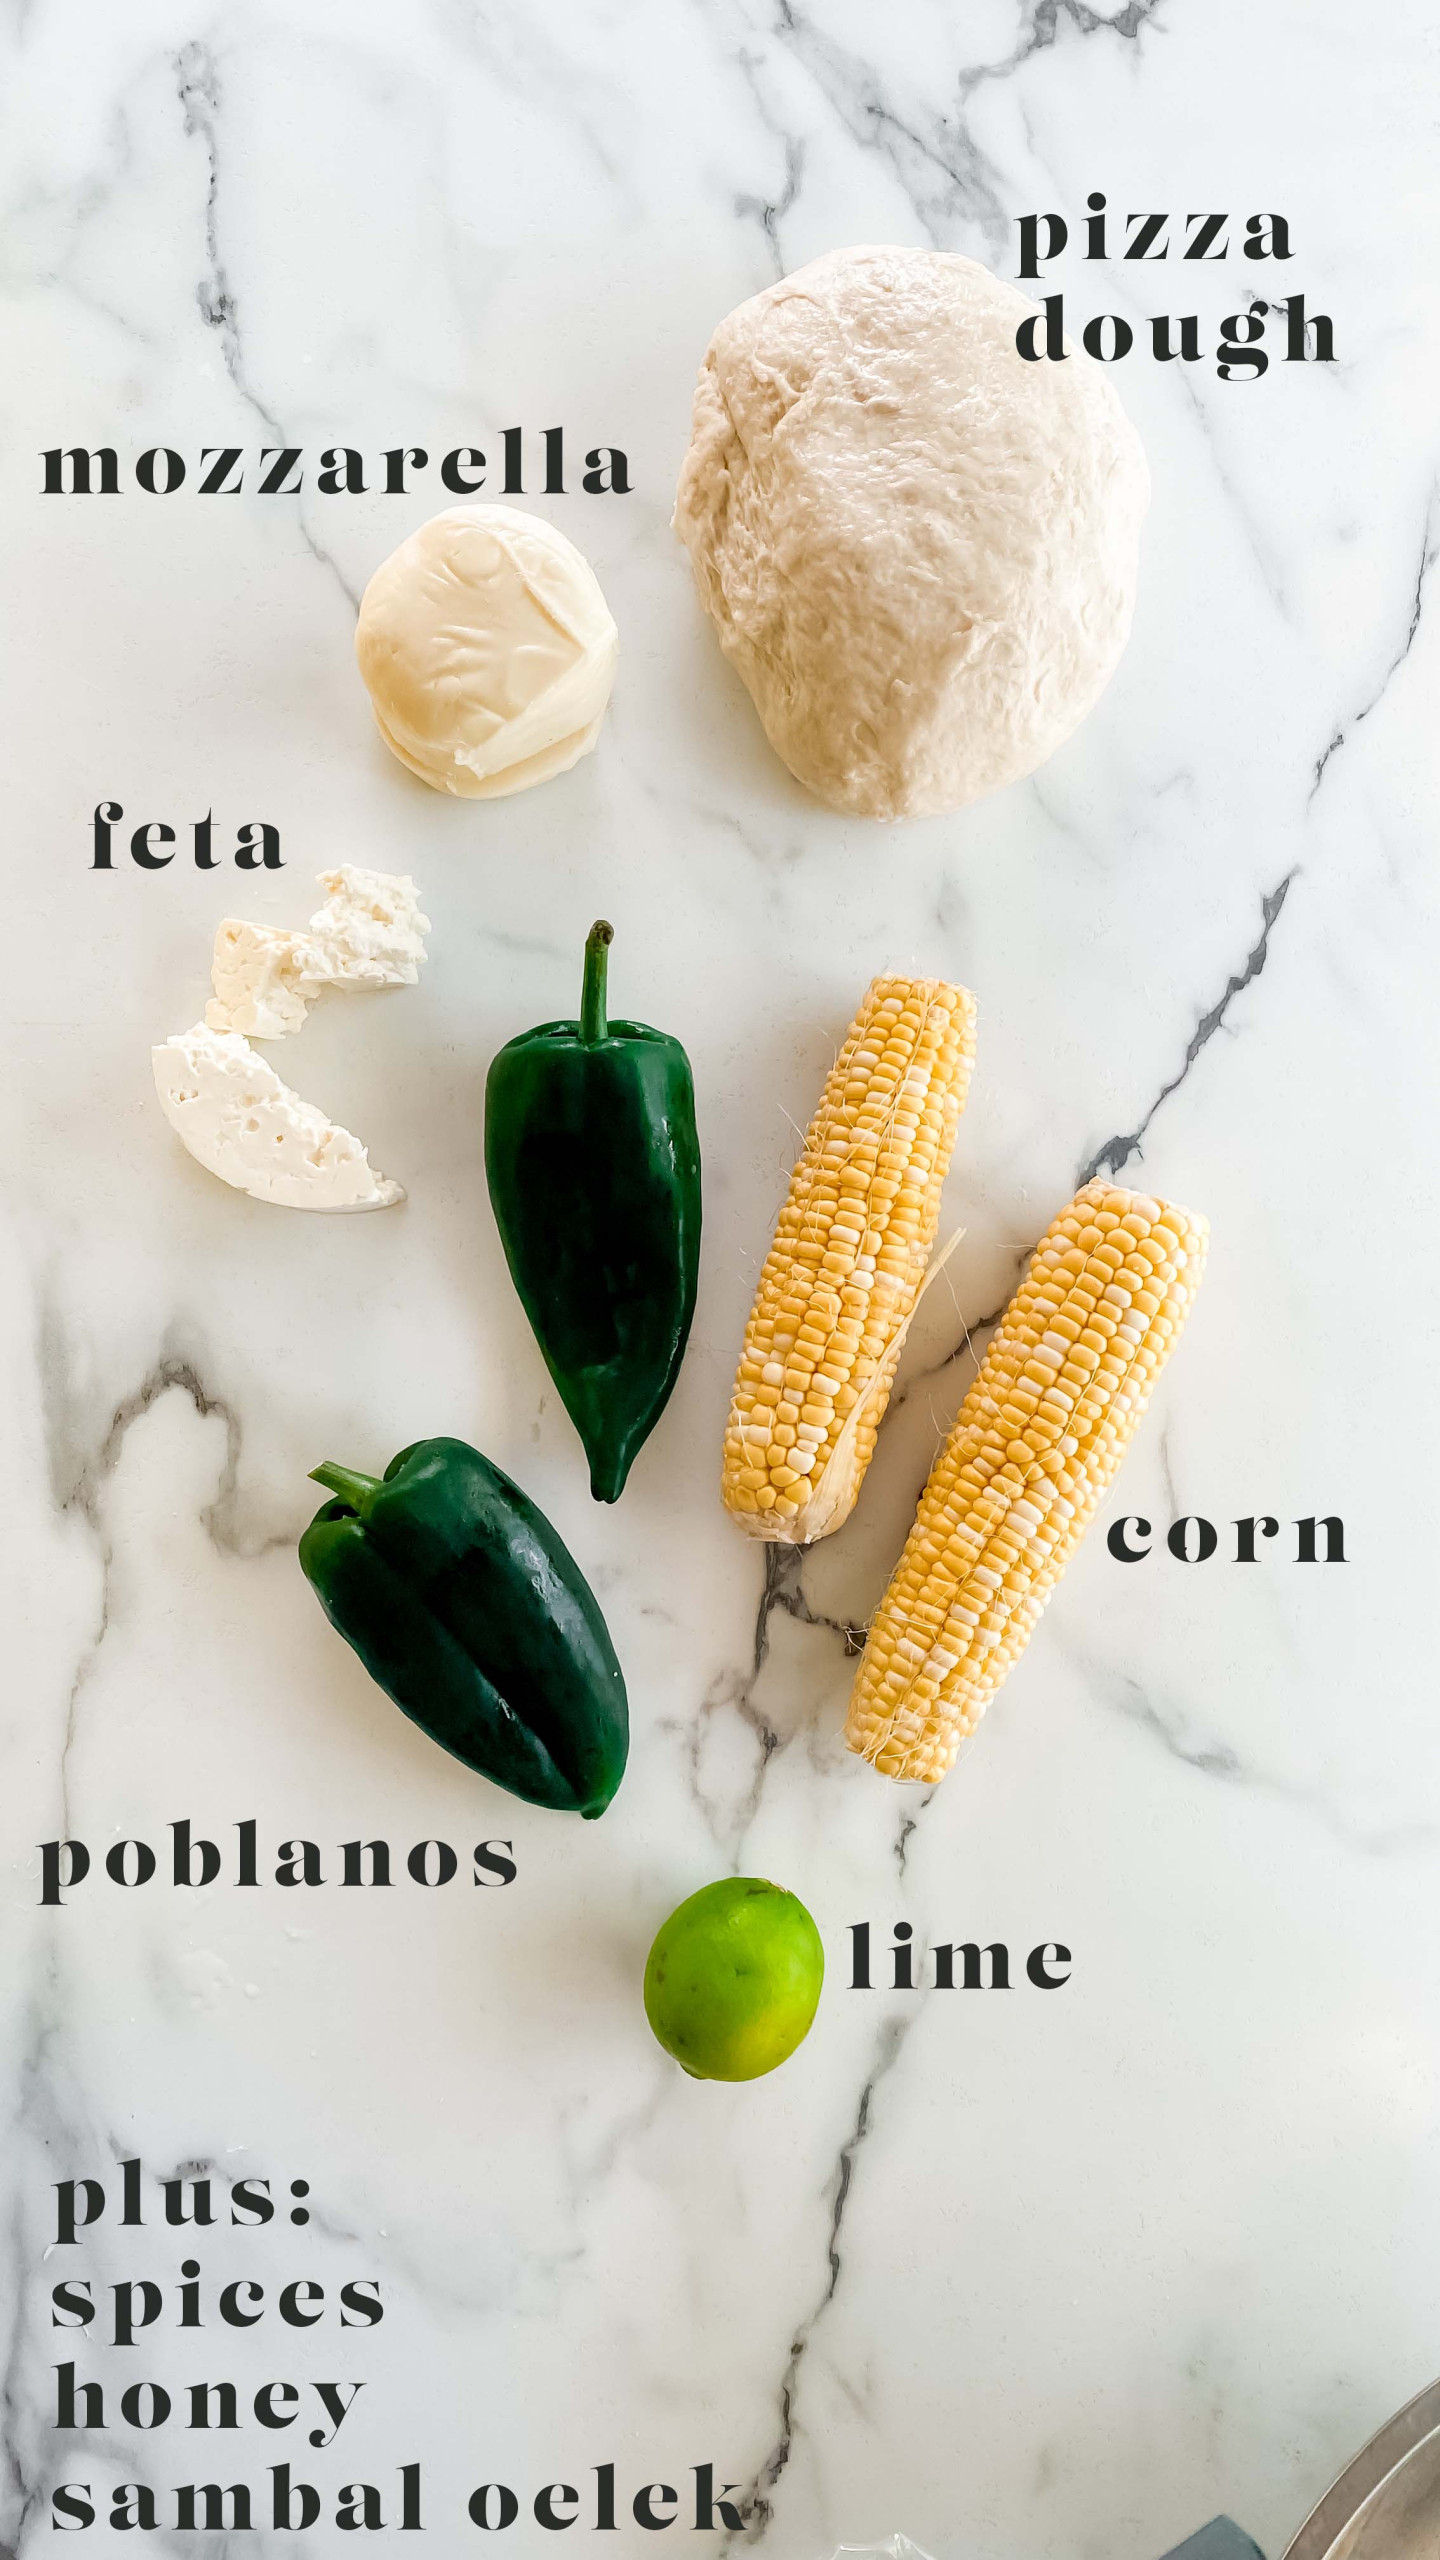 Ingredients for a poblano pizza on a white marble counter.